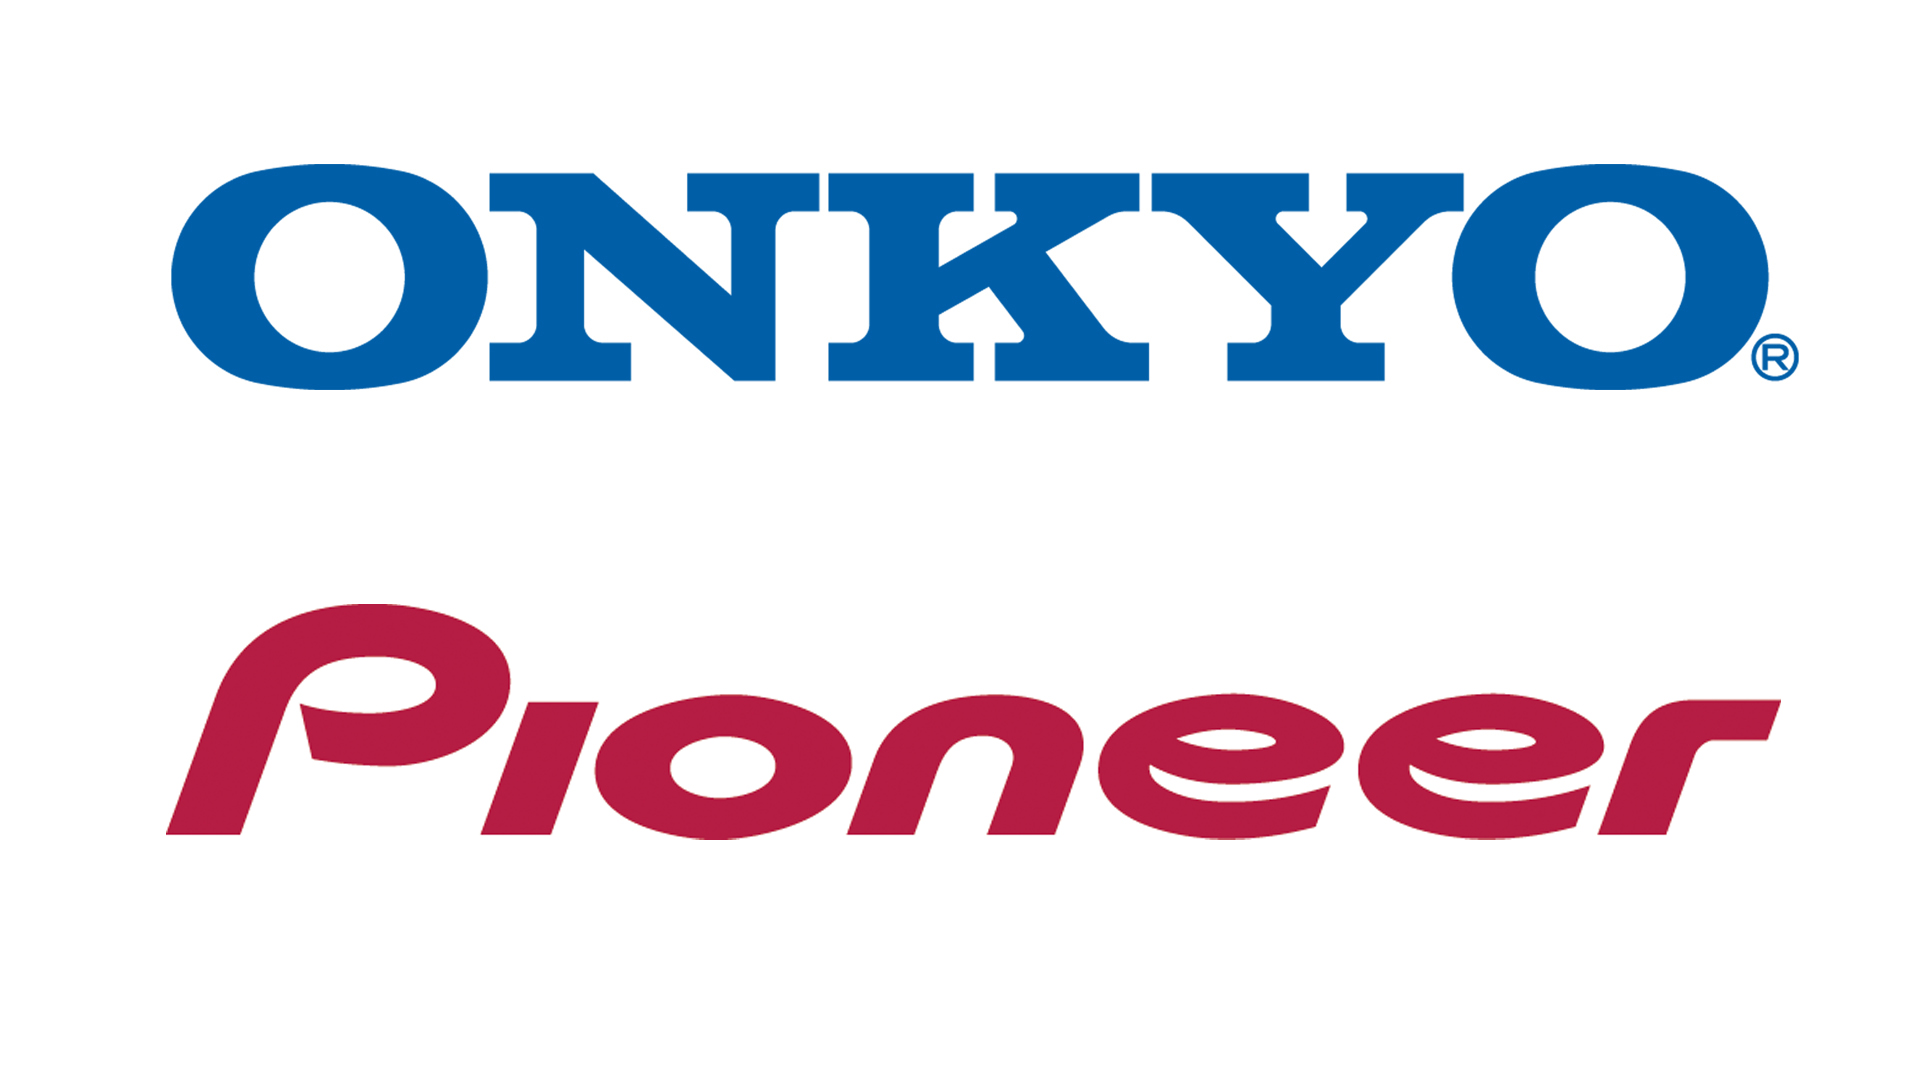 Onkyo and Pioneer are now part of Voxx (Image Credit: Onkyo/Pioneer/Voxx)